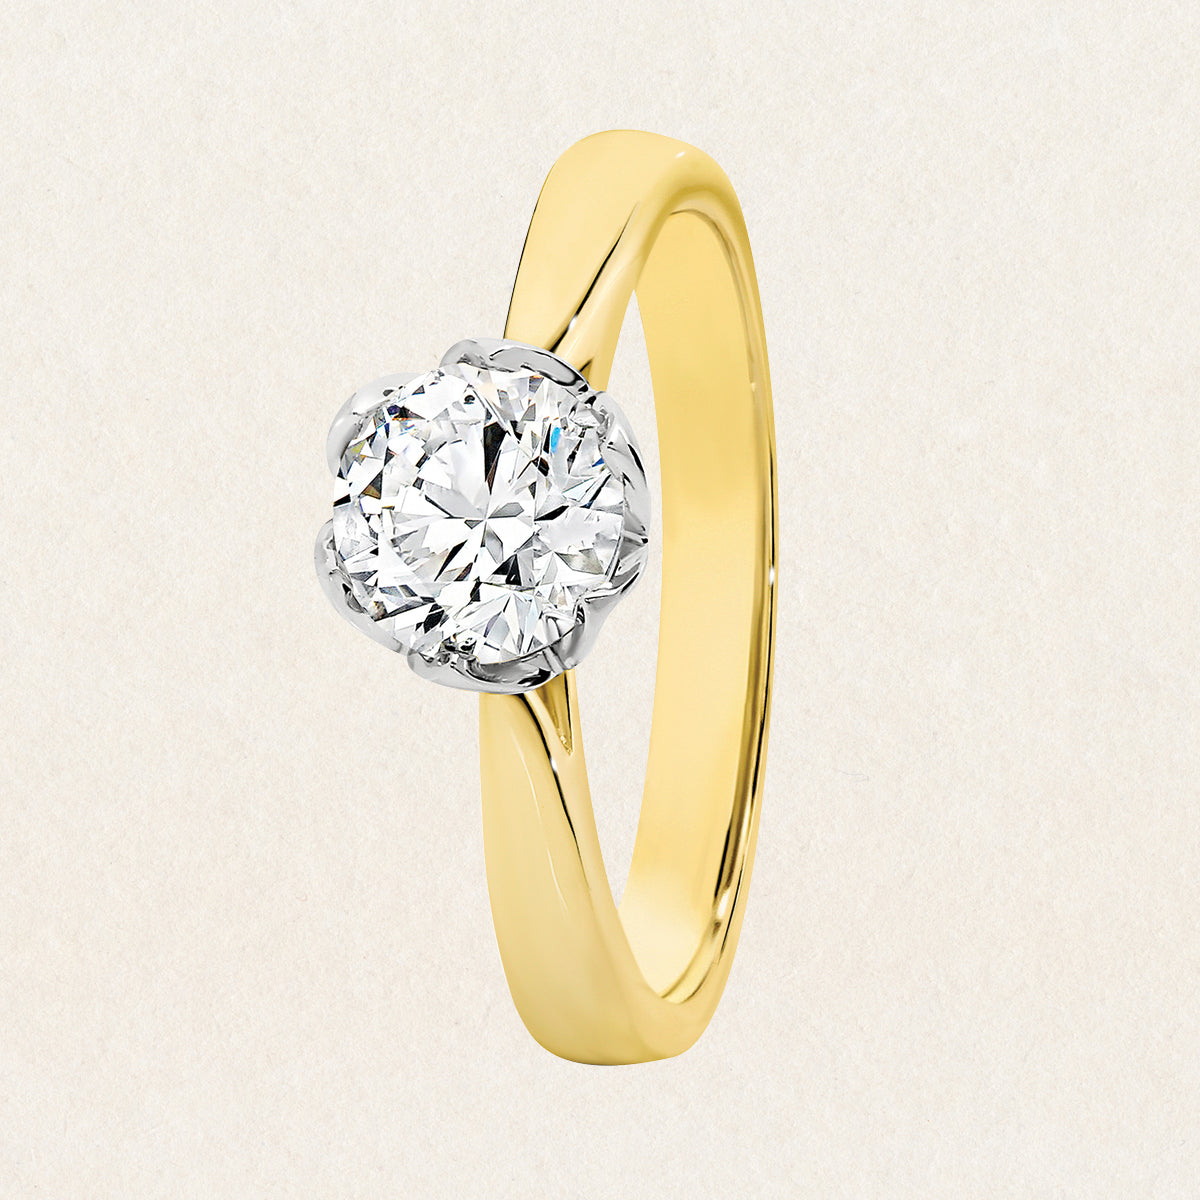 0.73ct lab grown diamond solitaire ring with 18k yellow and white gold